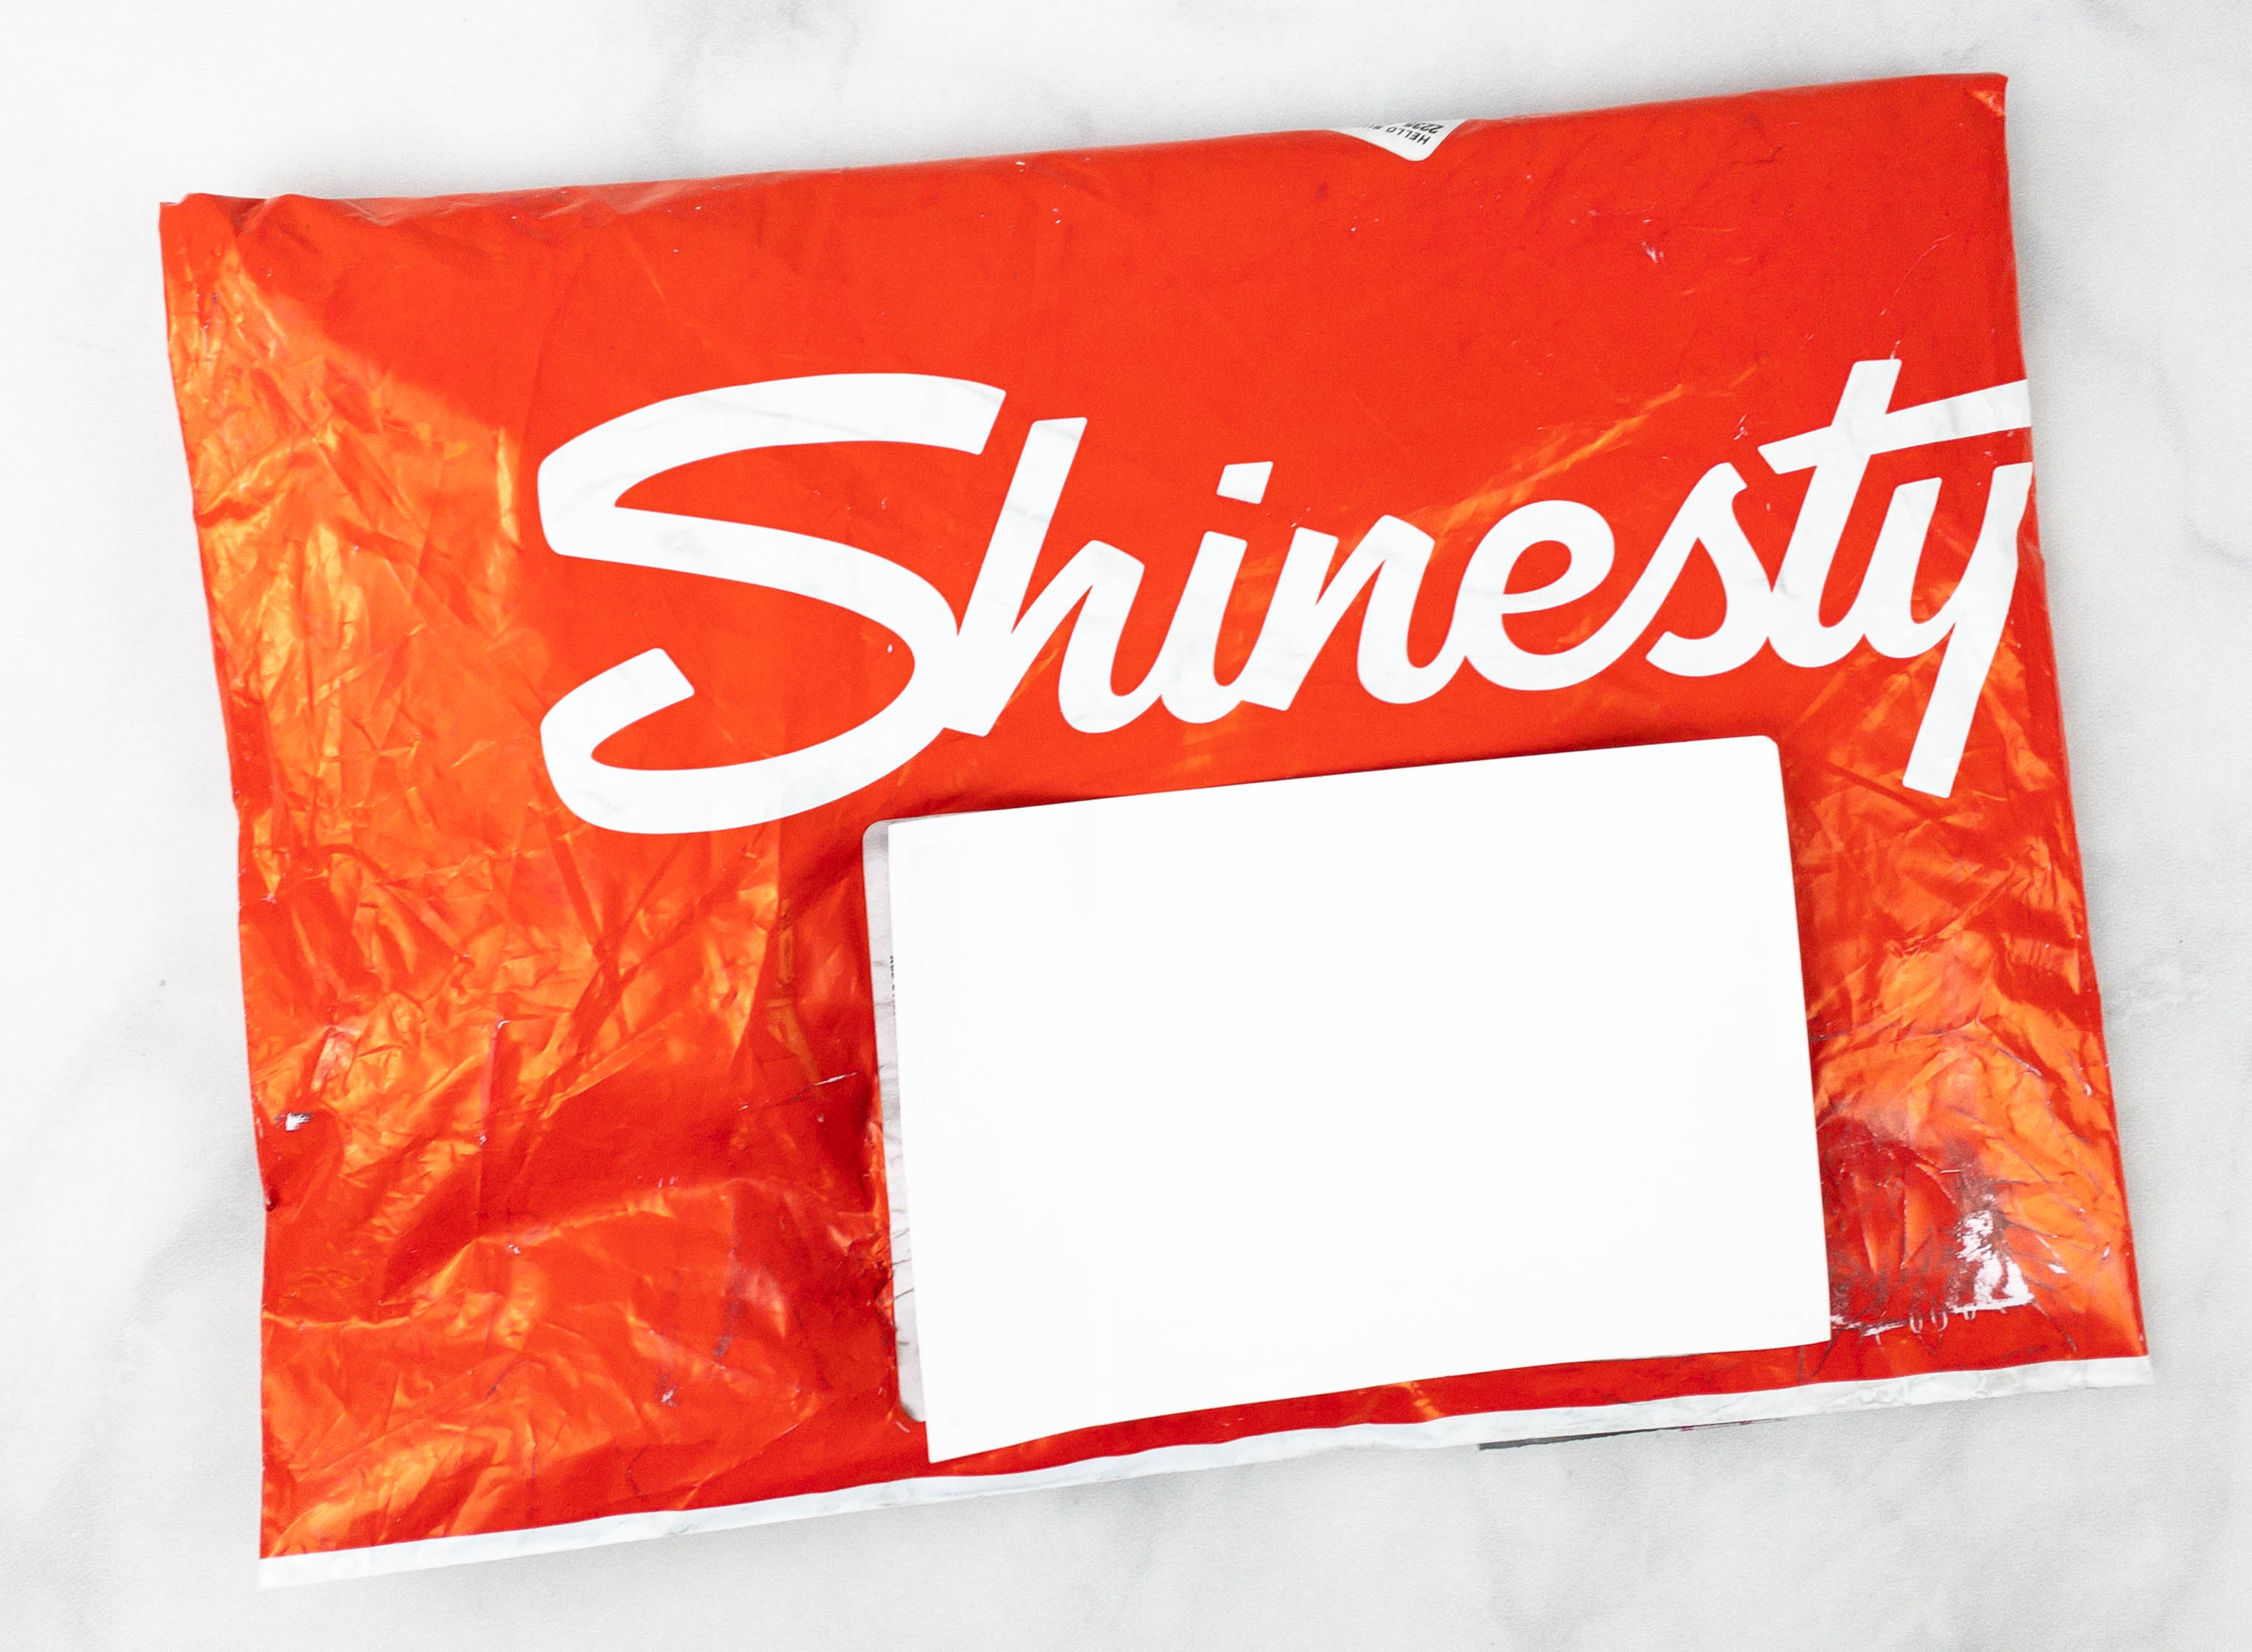 Shinesty Men's Boxers Subscription Review + Coupon - Hello